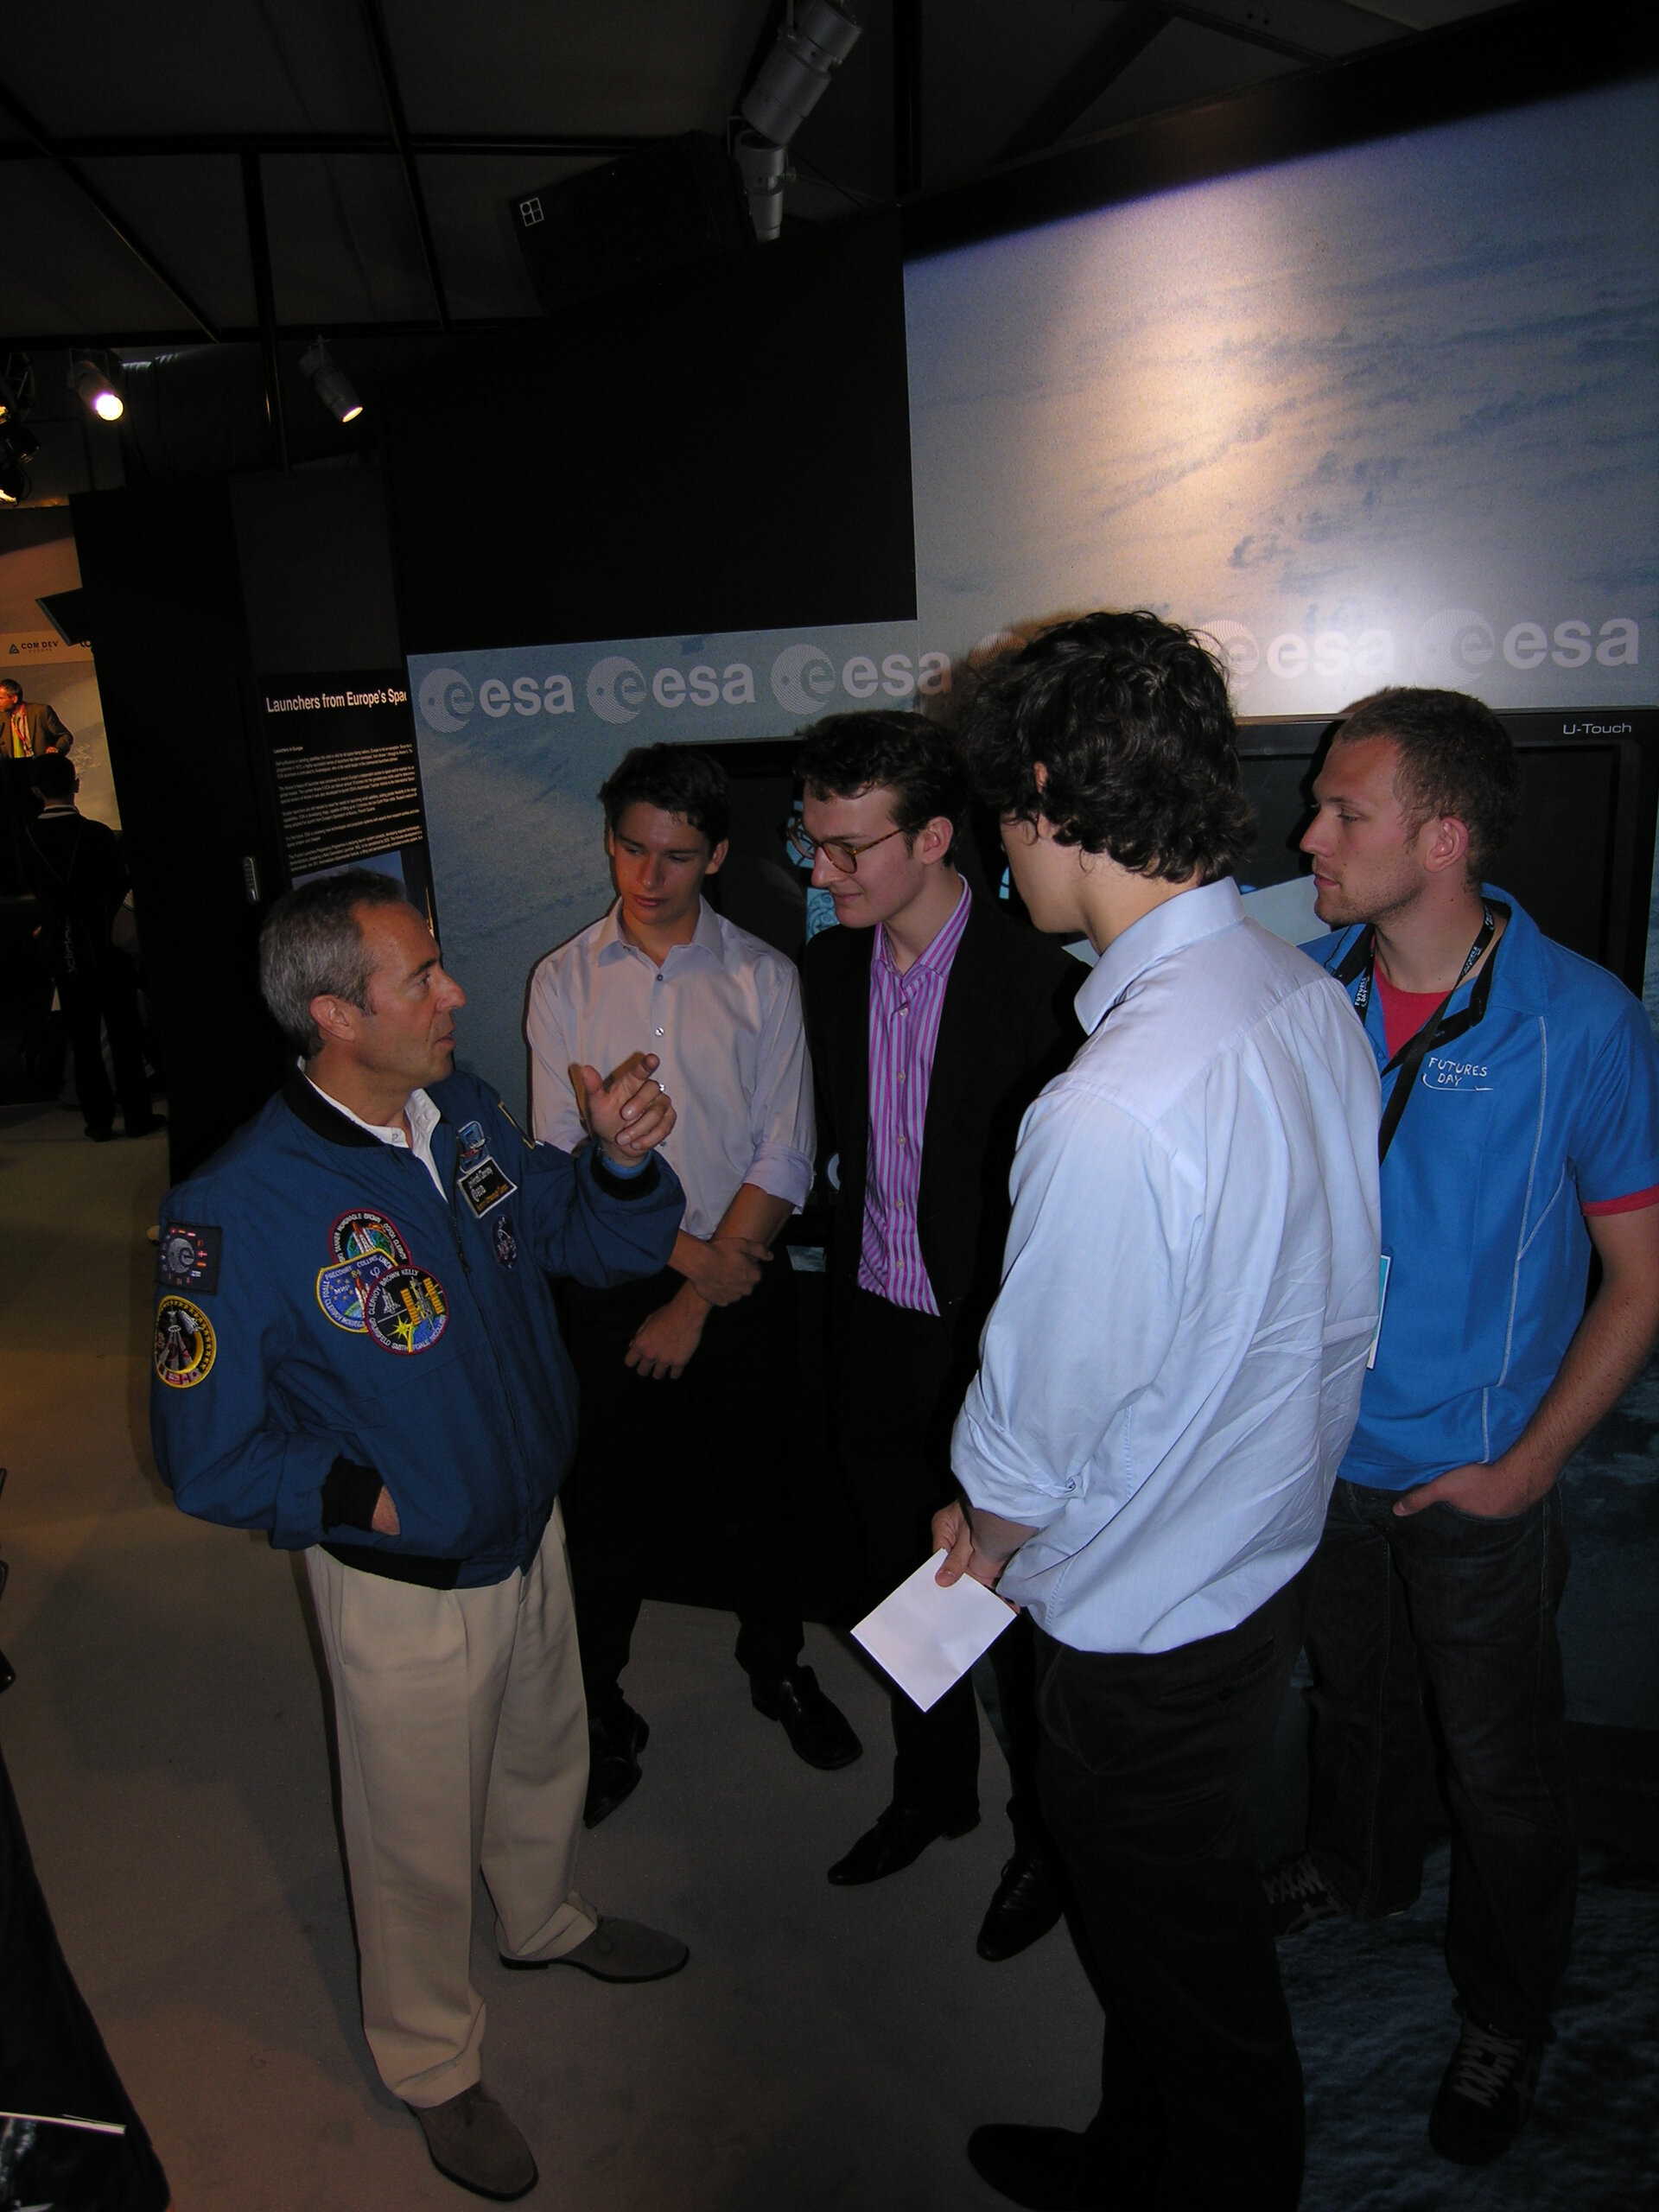 UK finalists of the ESA CanSat competition meet with JF Clervoy